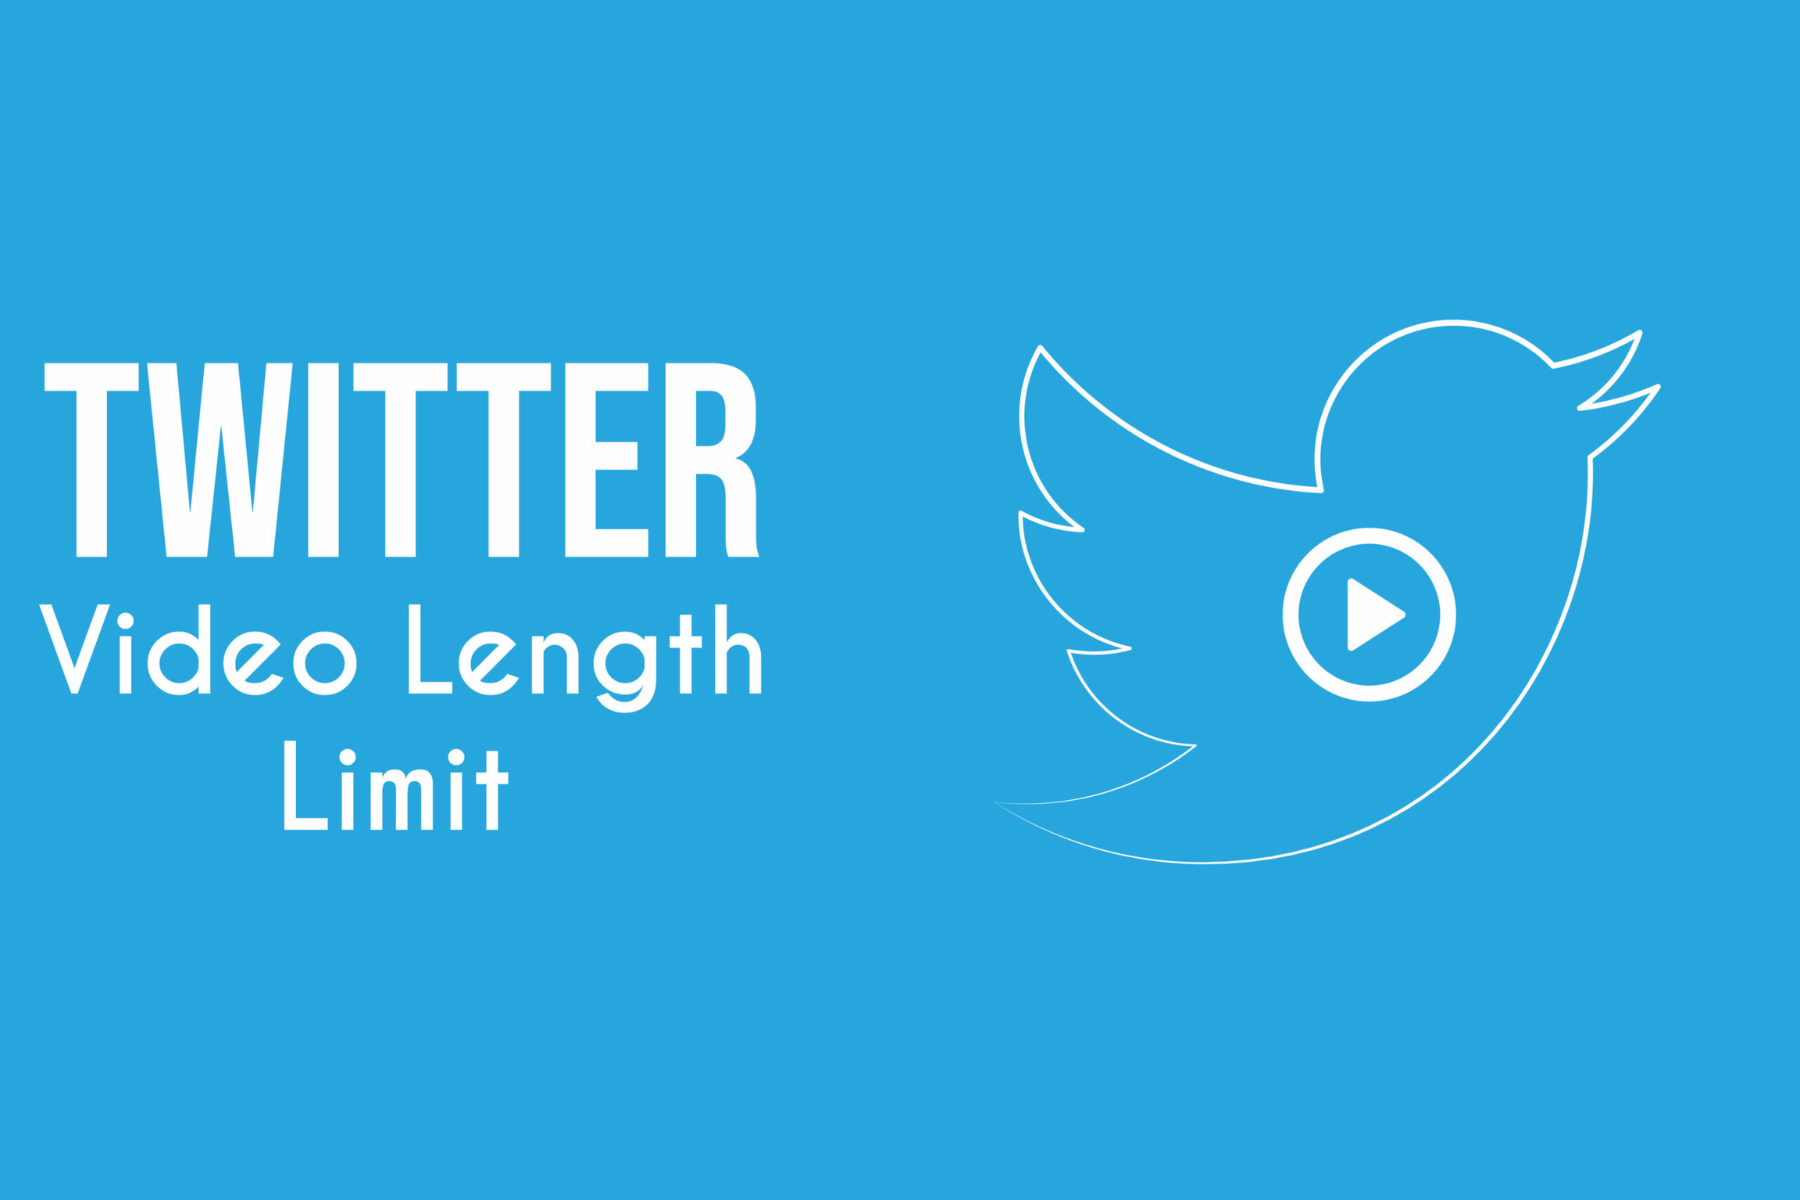 The phrase "TWITTER Video Length Limit" is followed by a Twitter logo with a play button